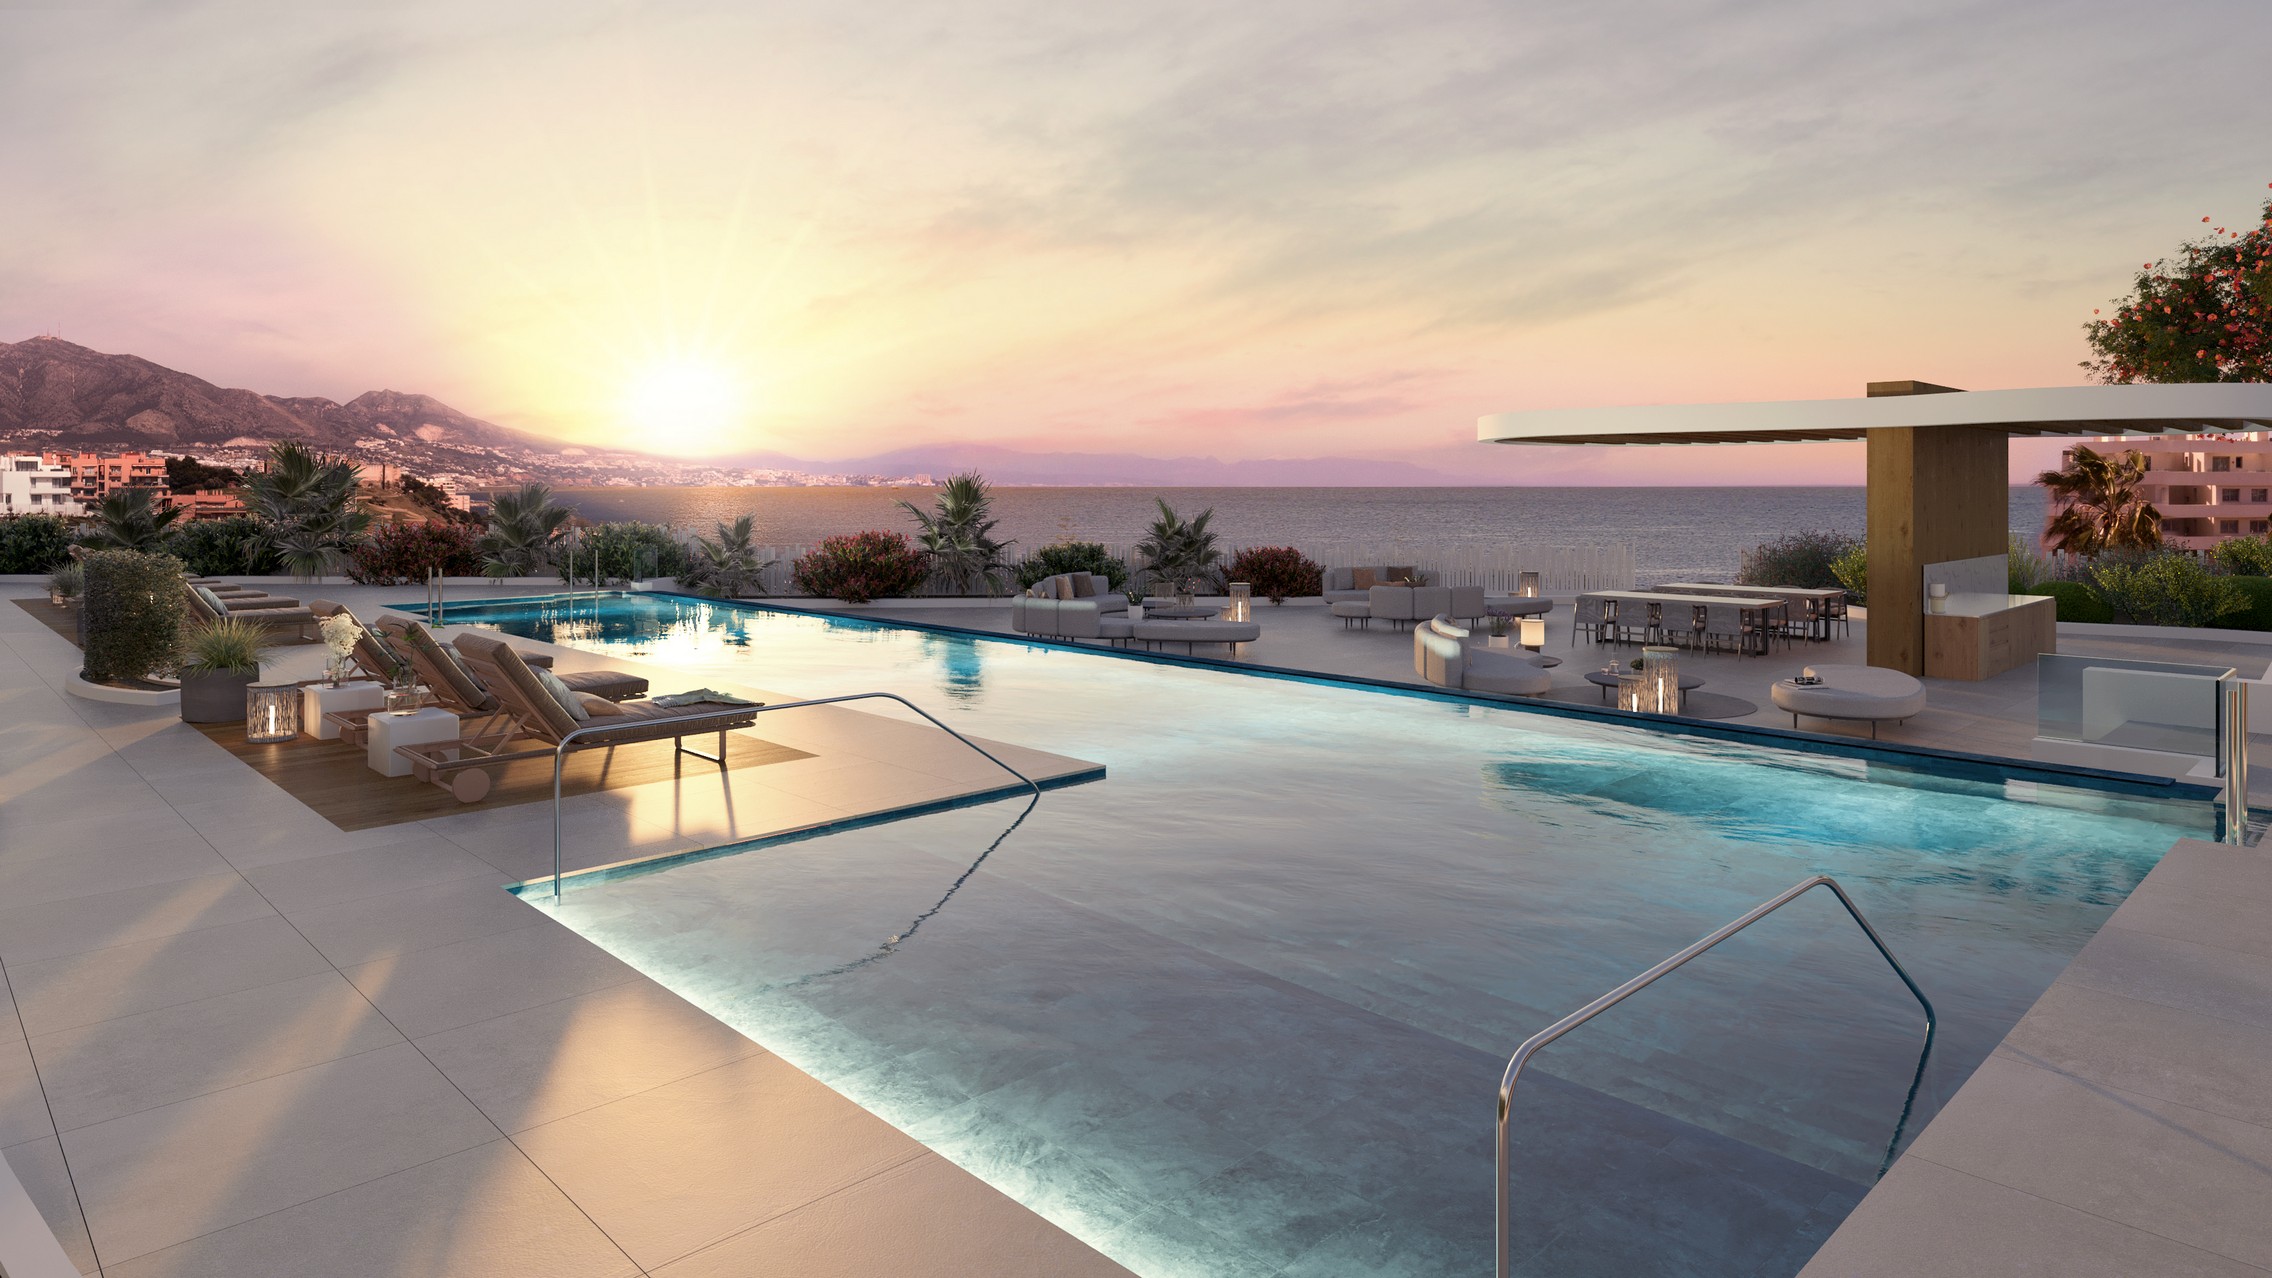 Best Areas to Buy Property on the Costa del Sol